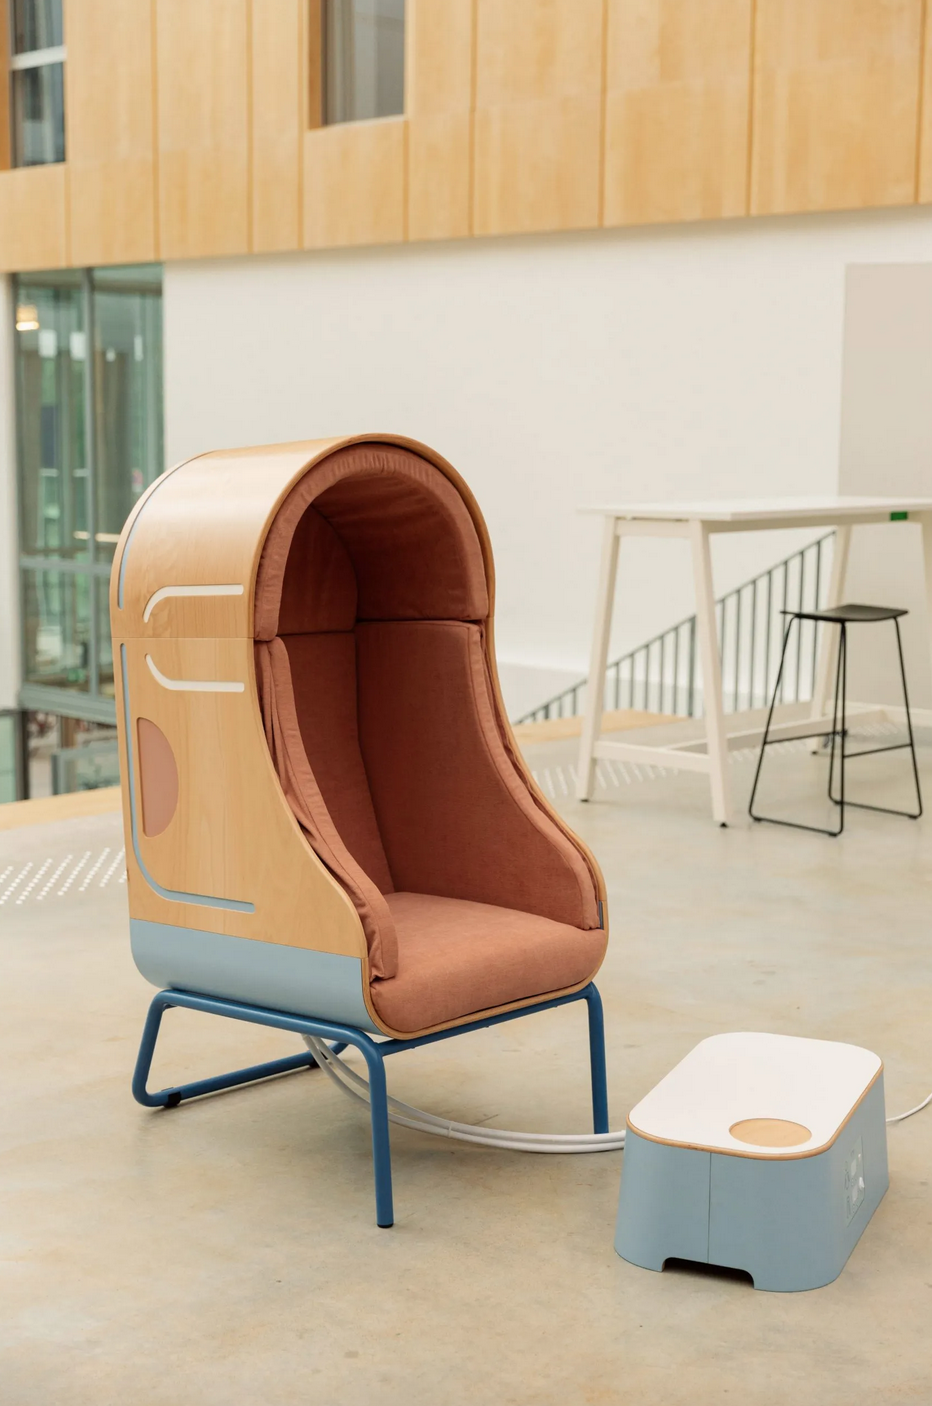 Wooden shell armchair with inflatable cushions inside, and footrest, set in a large office space